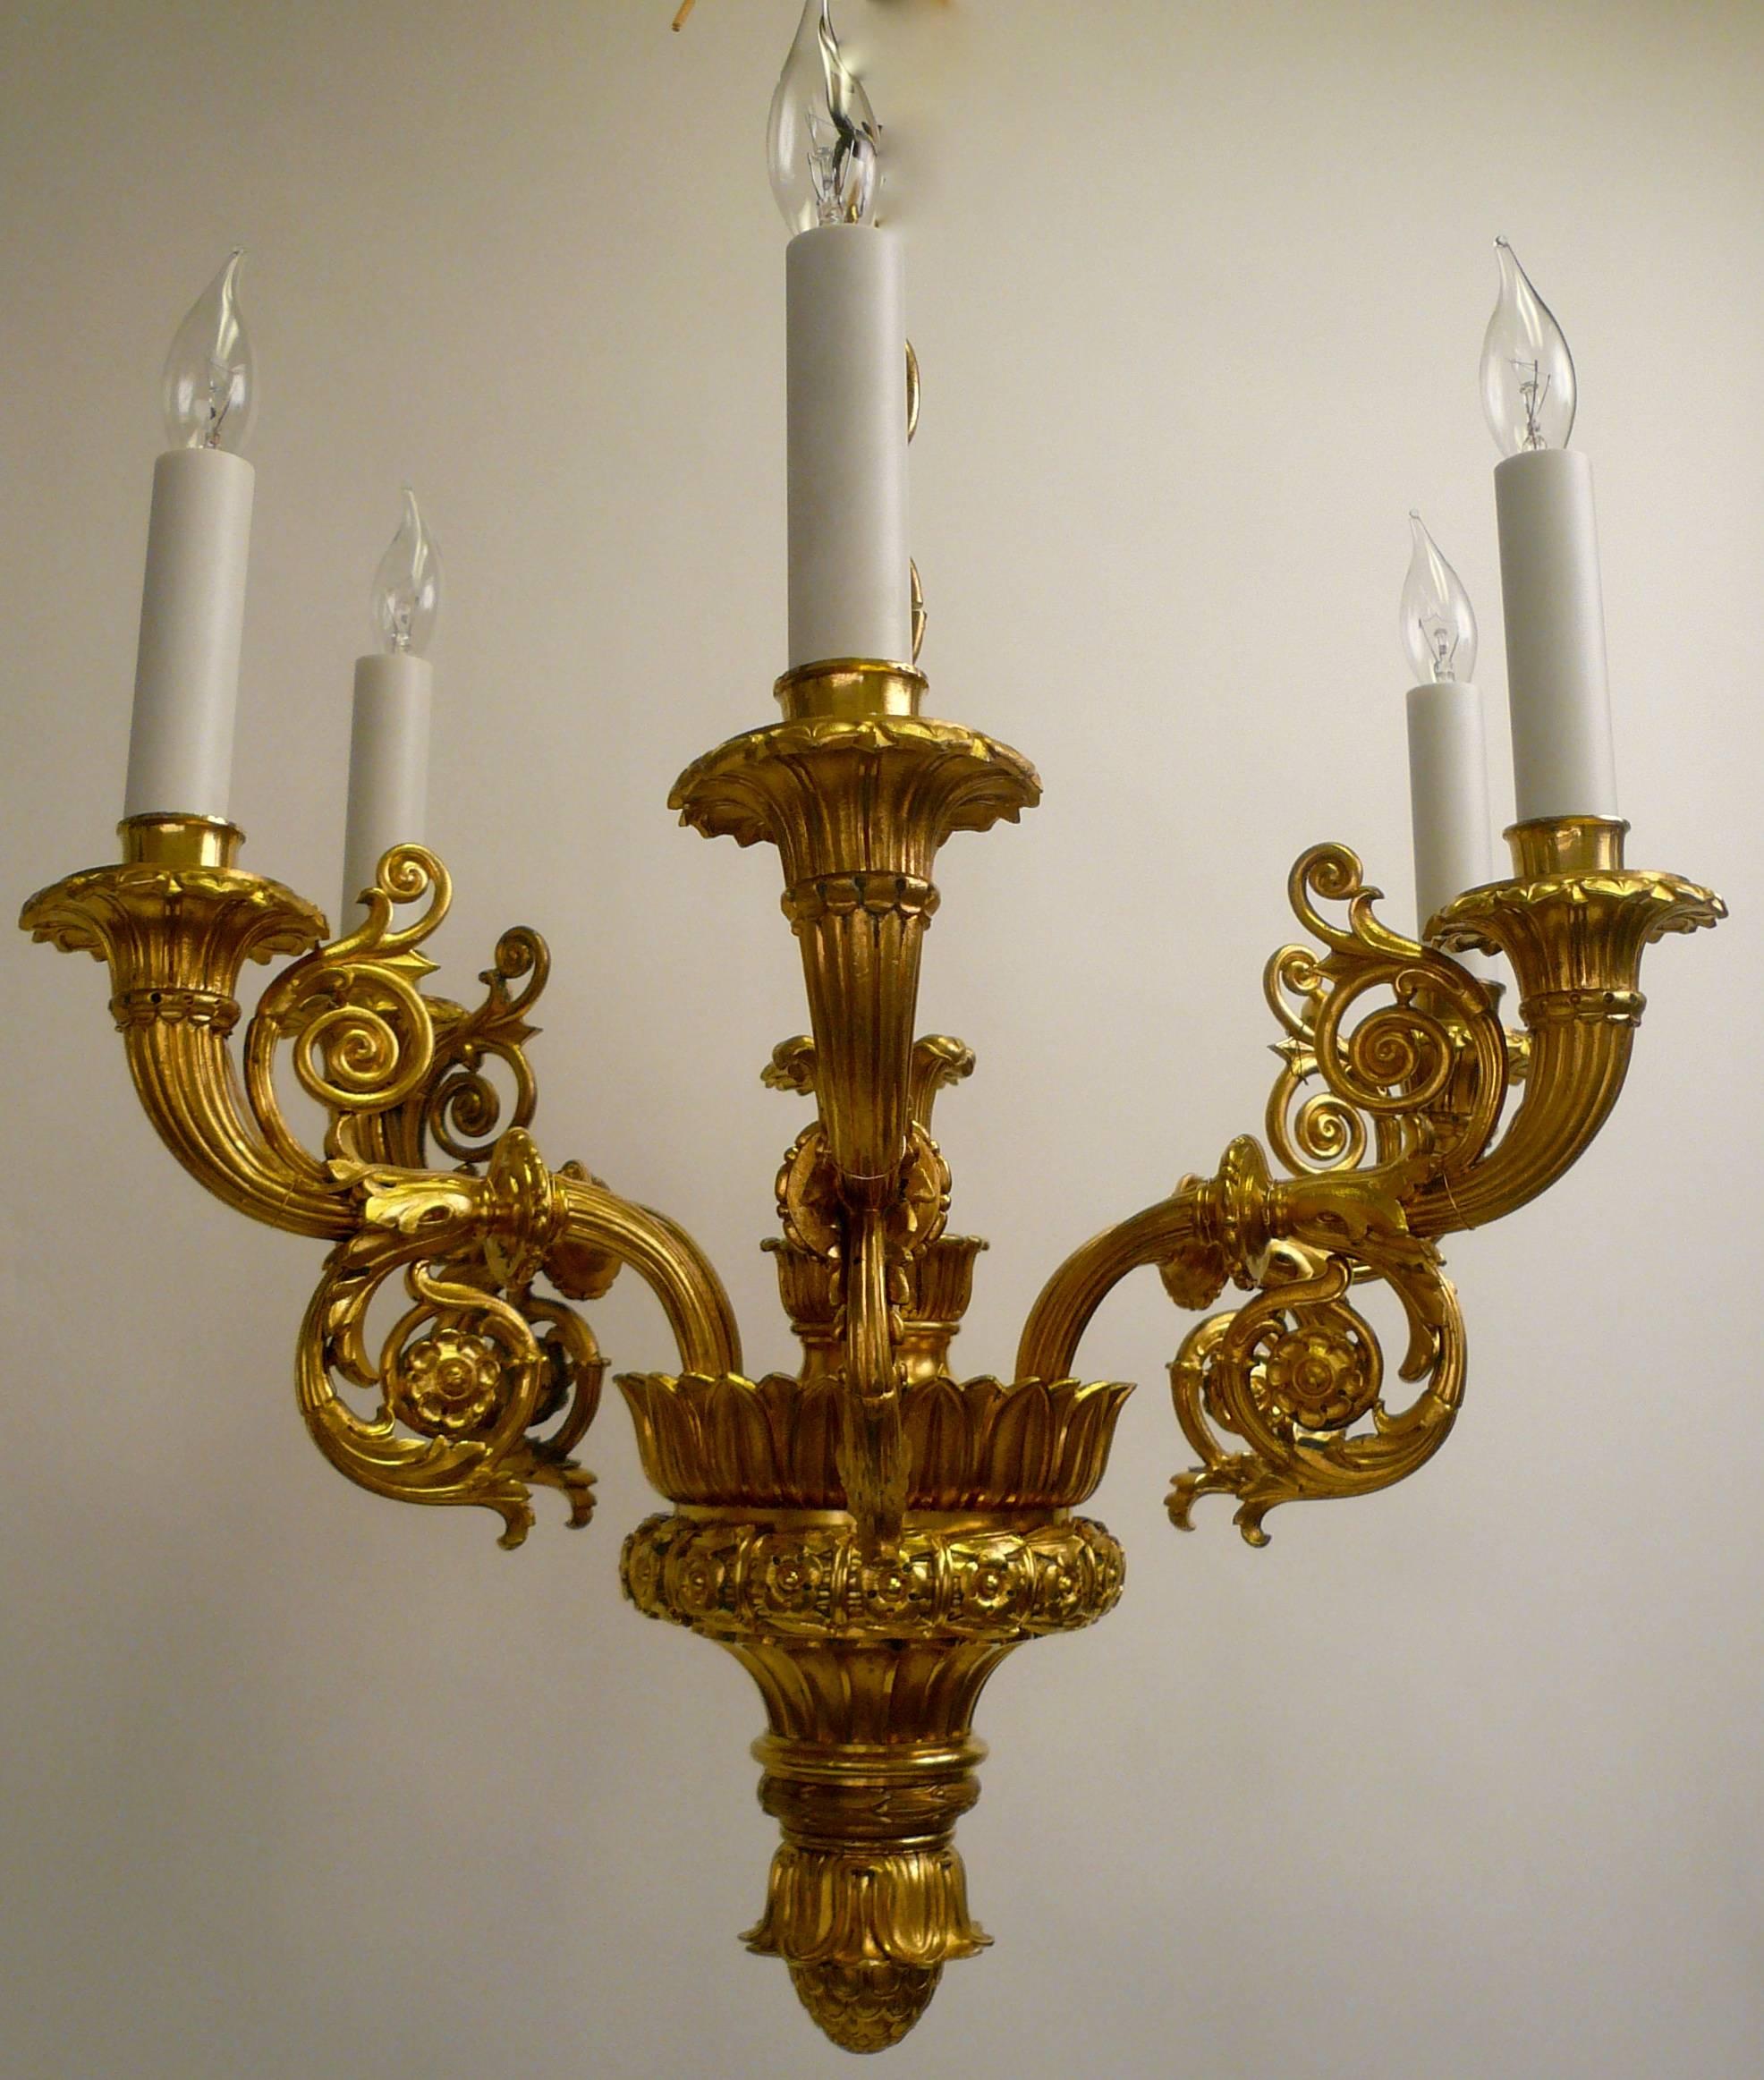 This Neo-Classical style ormolu fixture is of the finest quality, made of cast, and hand chased bronze.